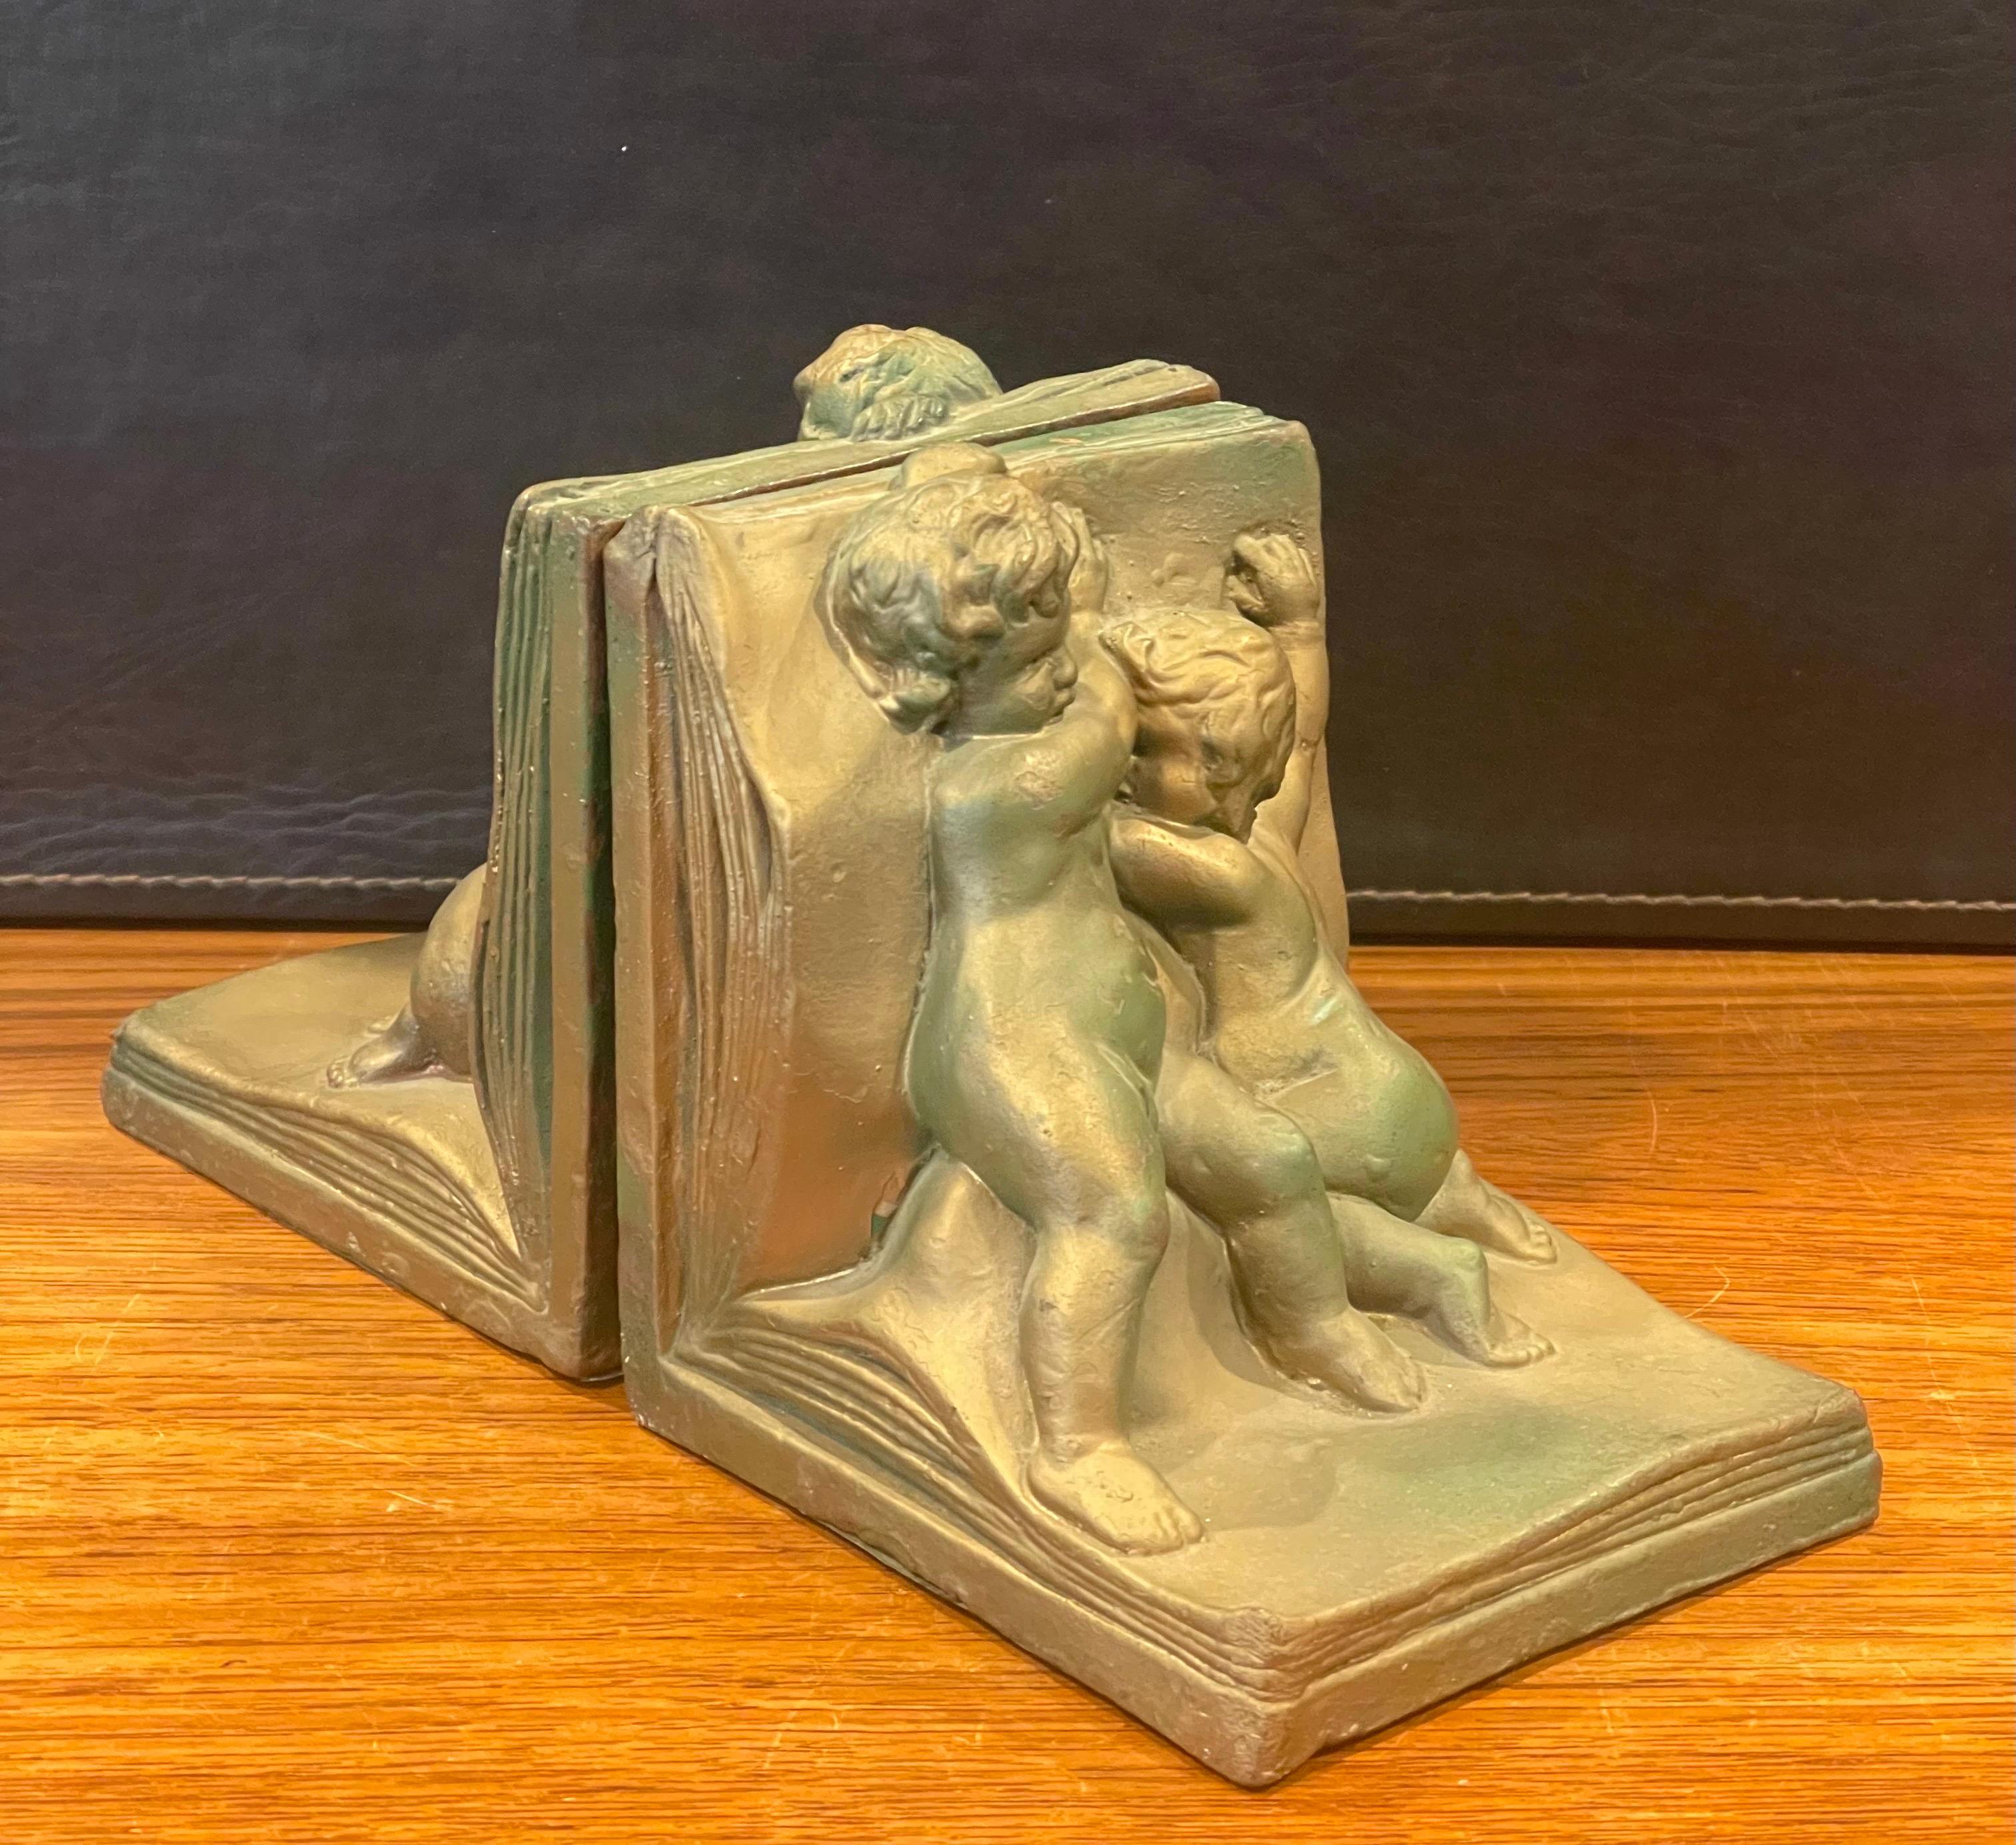 Gorgeous pair of bronze clad cherub Art Deco bookends by Art Bronze, circa 1930s. They are in original condition with a fine patina, some light oxidation and some surface scratches; the pair measures 10.25